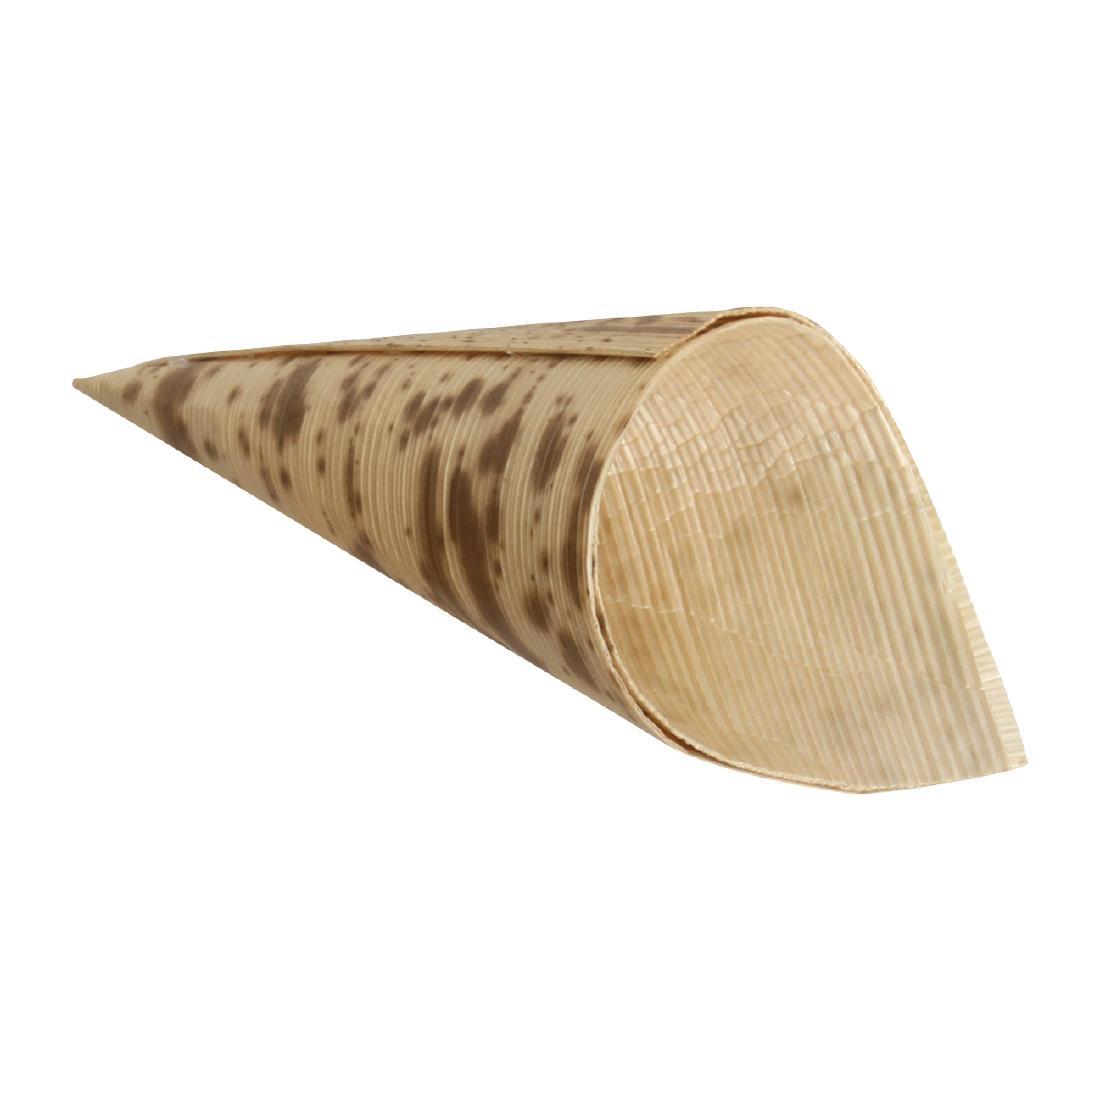 Fiesta Compostable Bamboo Canape Cones 35mm (Pack of 200) - DK385  - 2